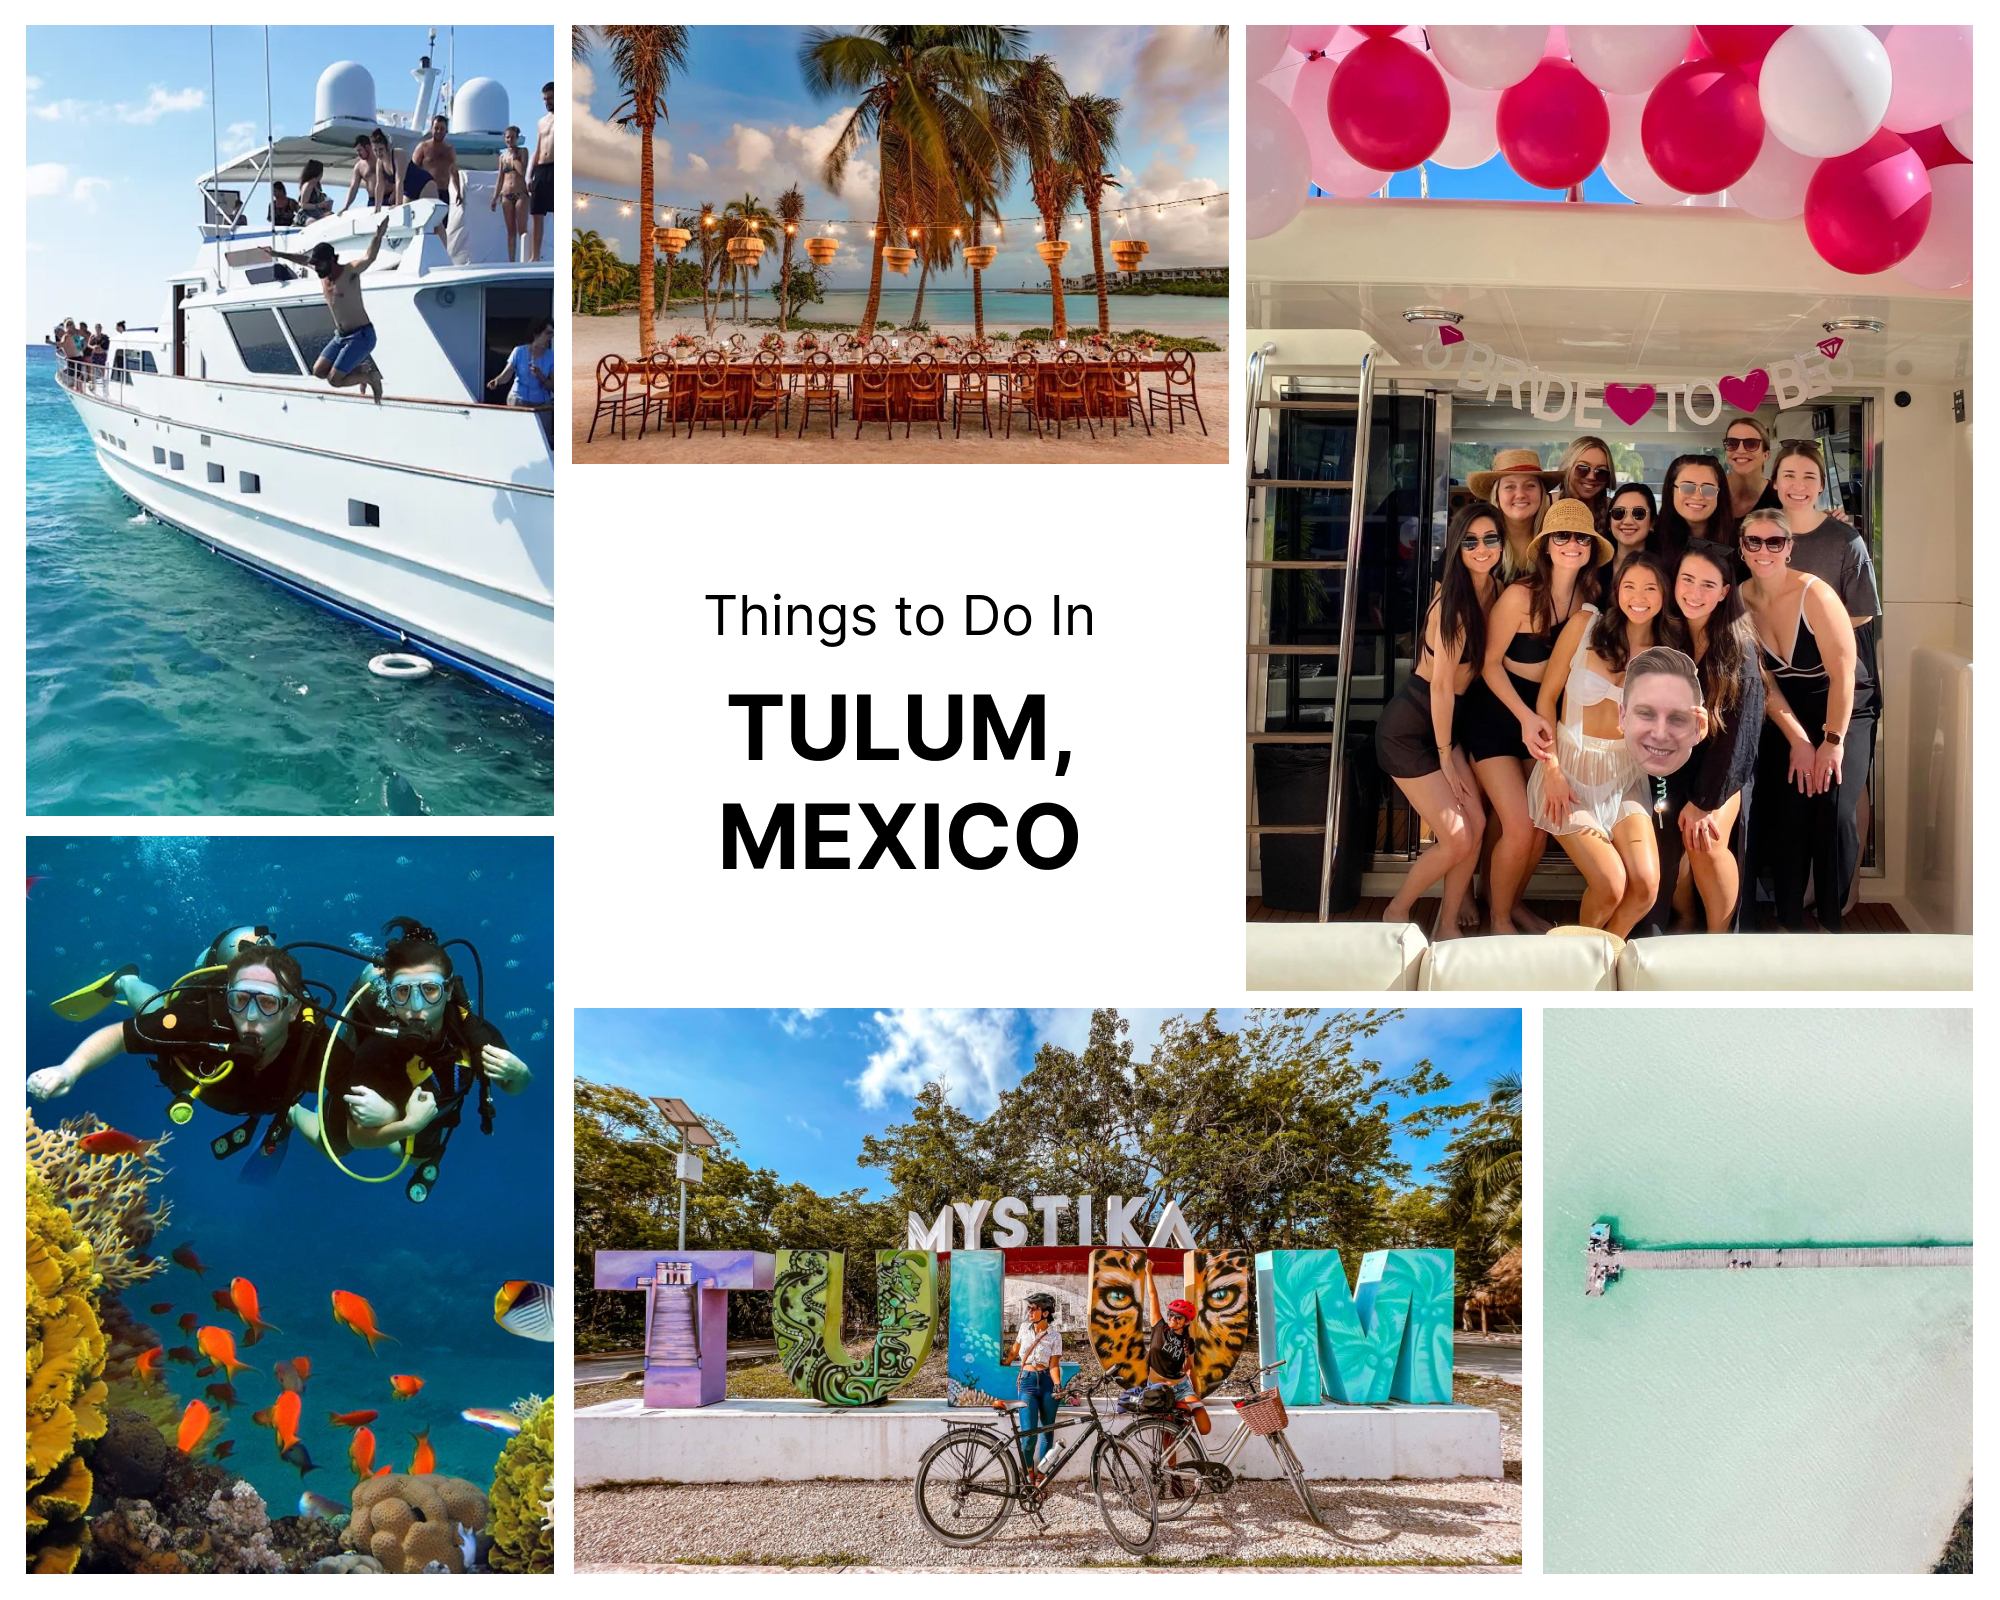 Things to Do in Tulum, Mexico